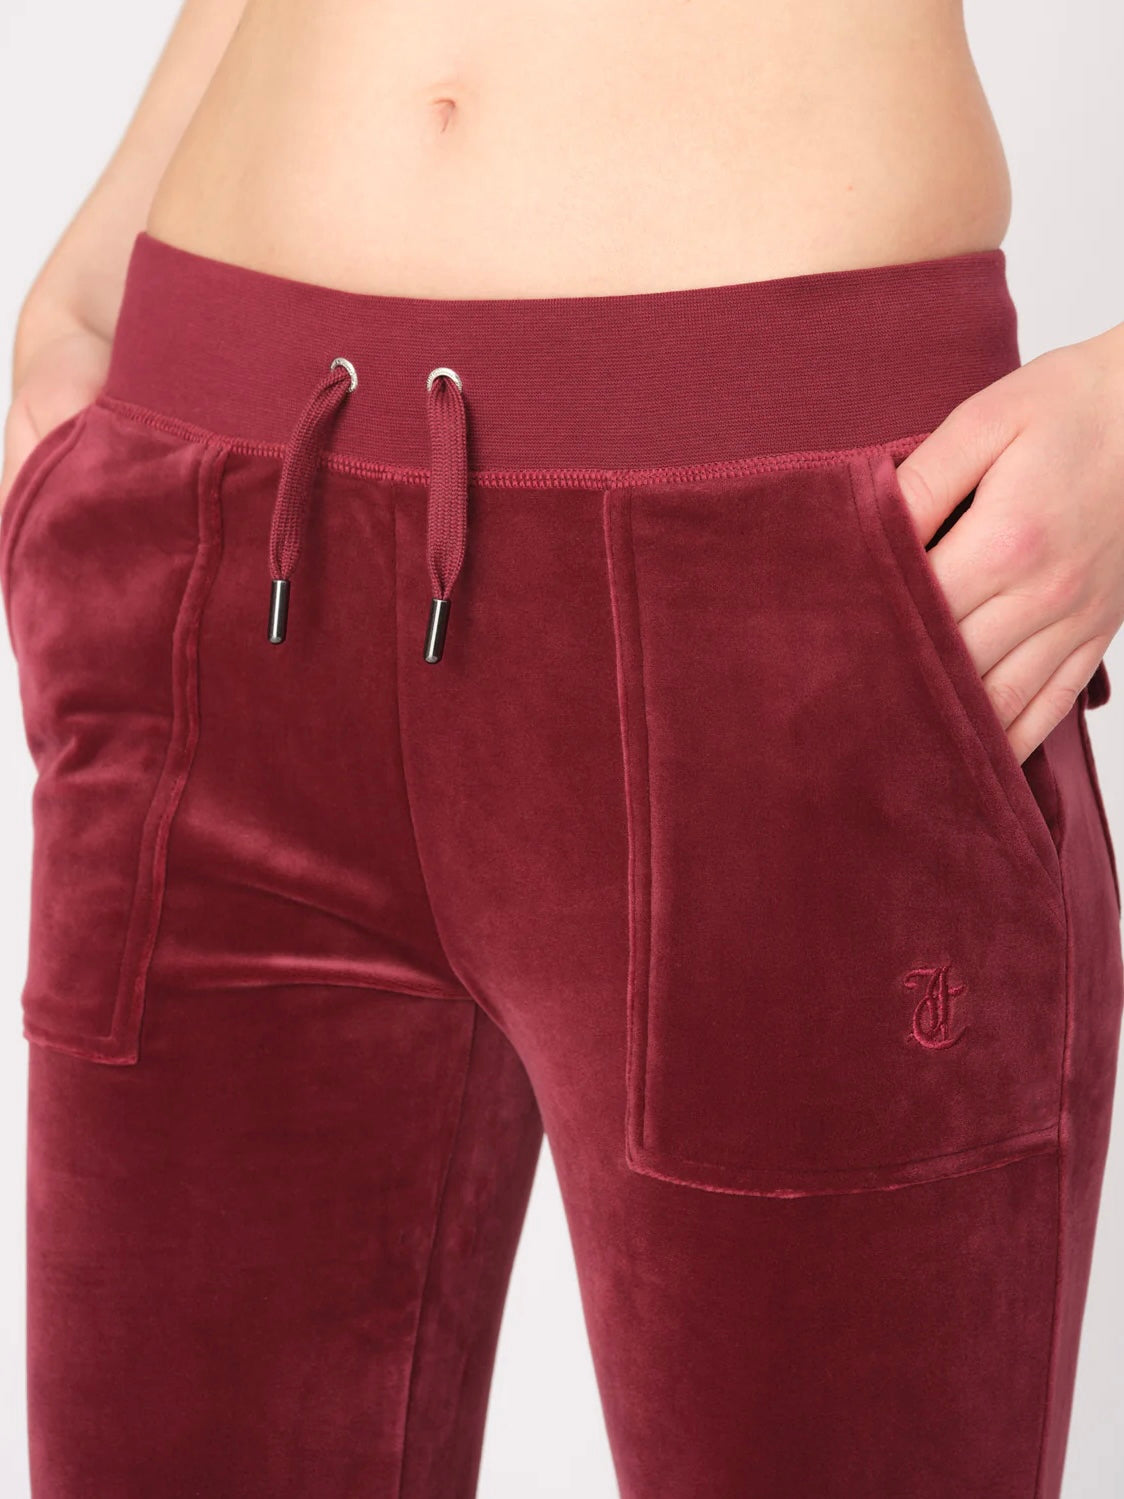 
                  
                    JUICY COUTURE LAYLA POCKET FLARE LR TAWNY PORT
                  
                